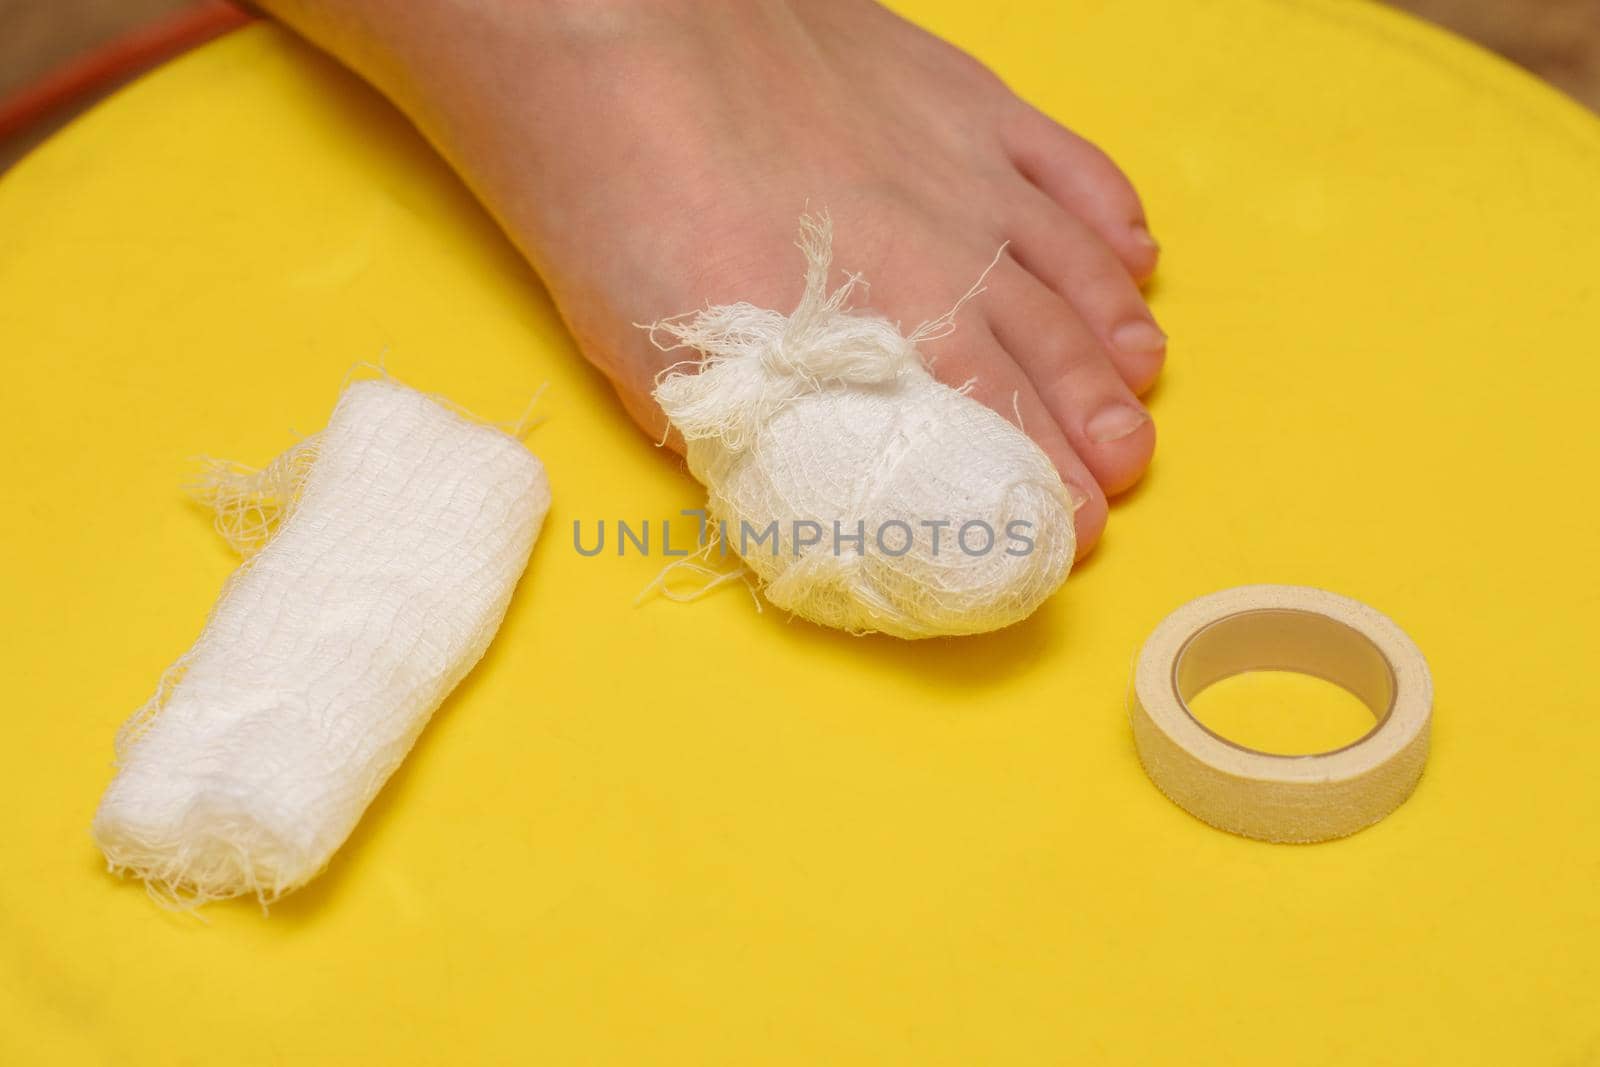 Bandage your big toe, there is a bandage and an adhesive plaster nearby